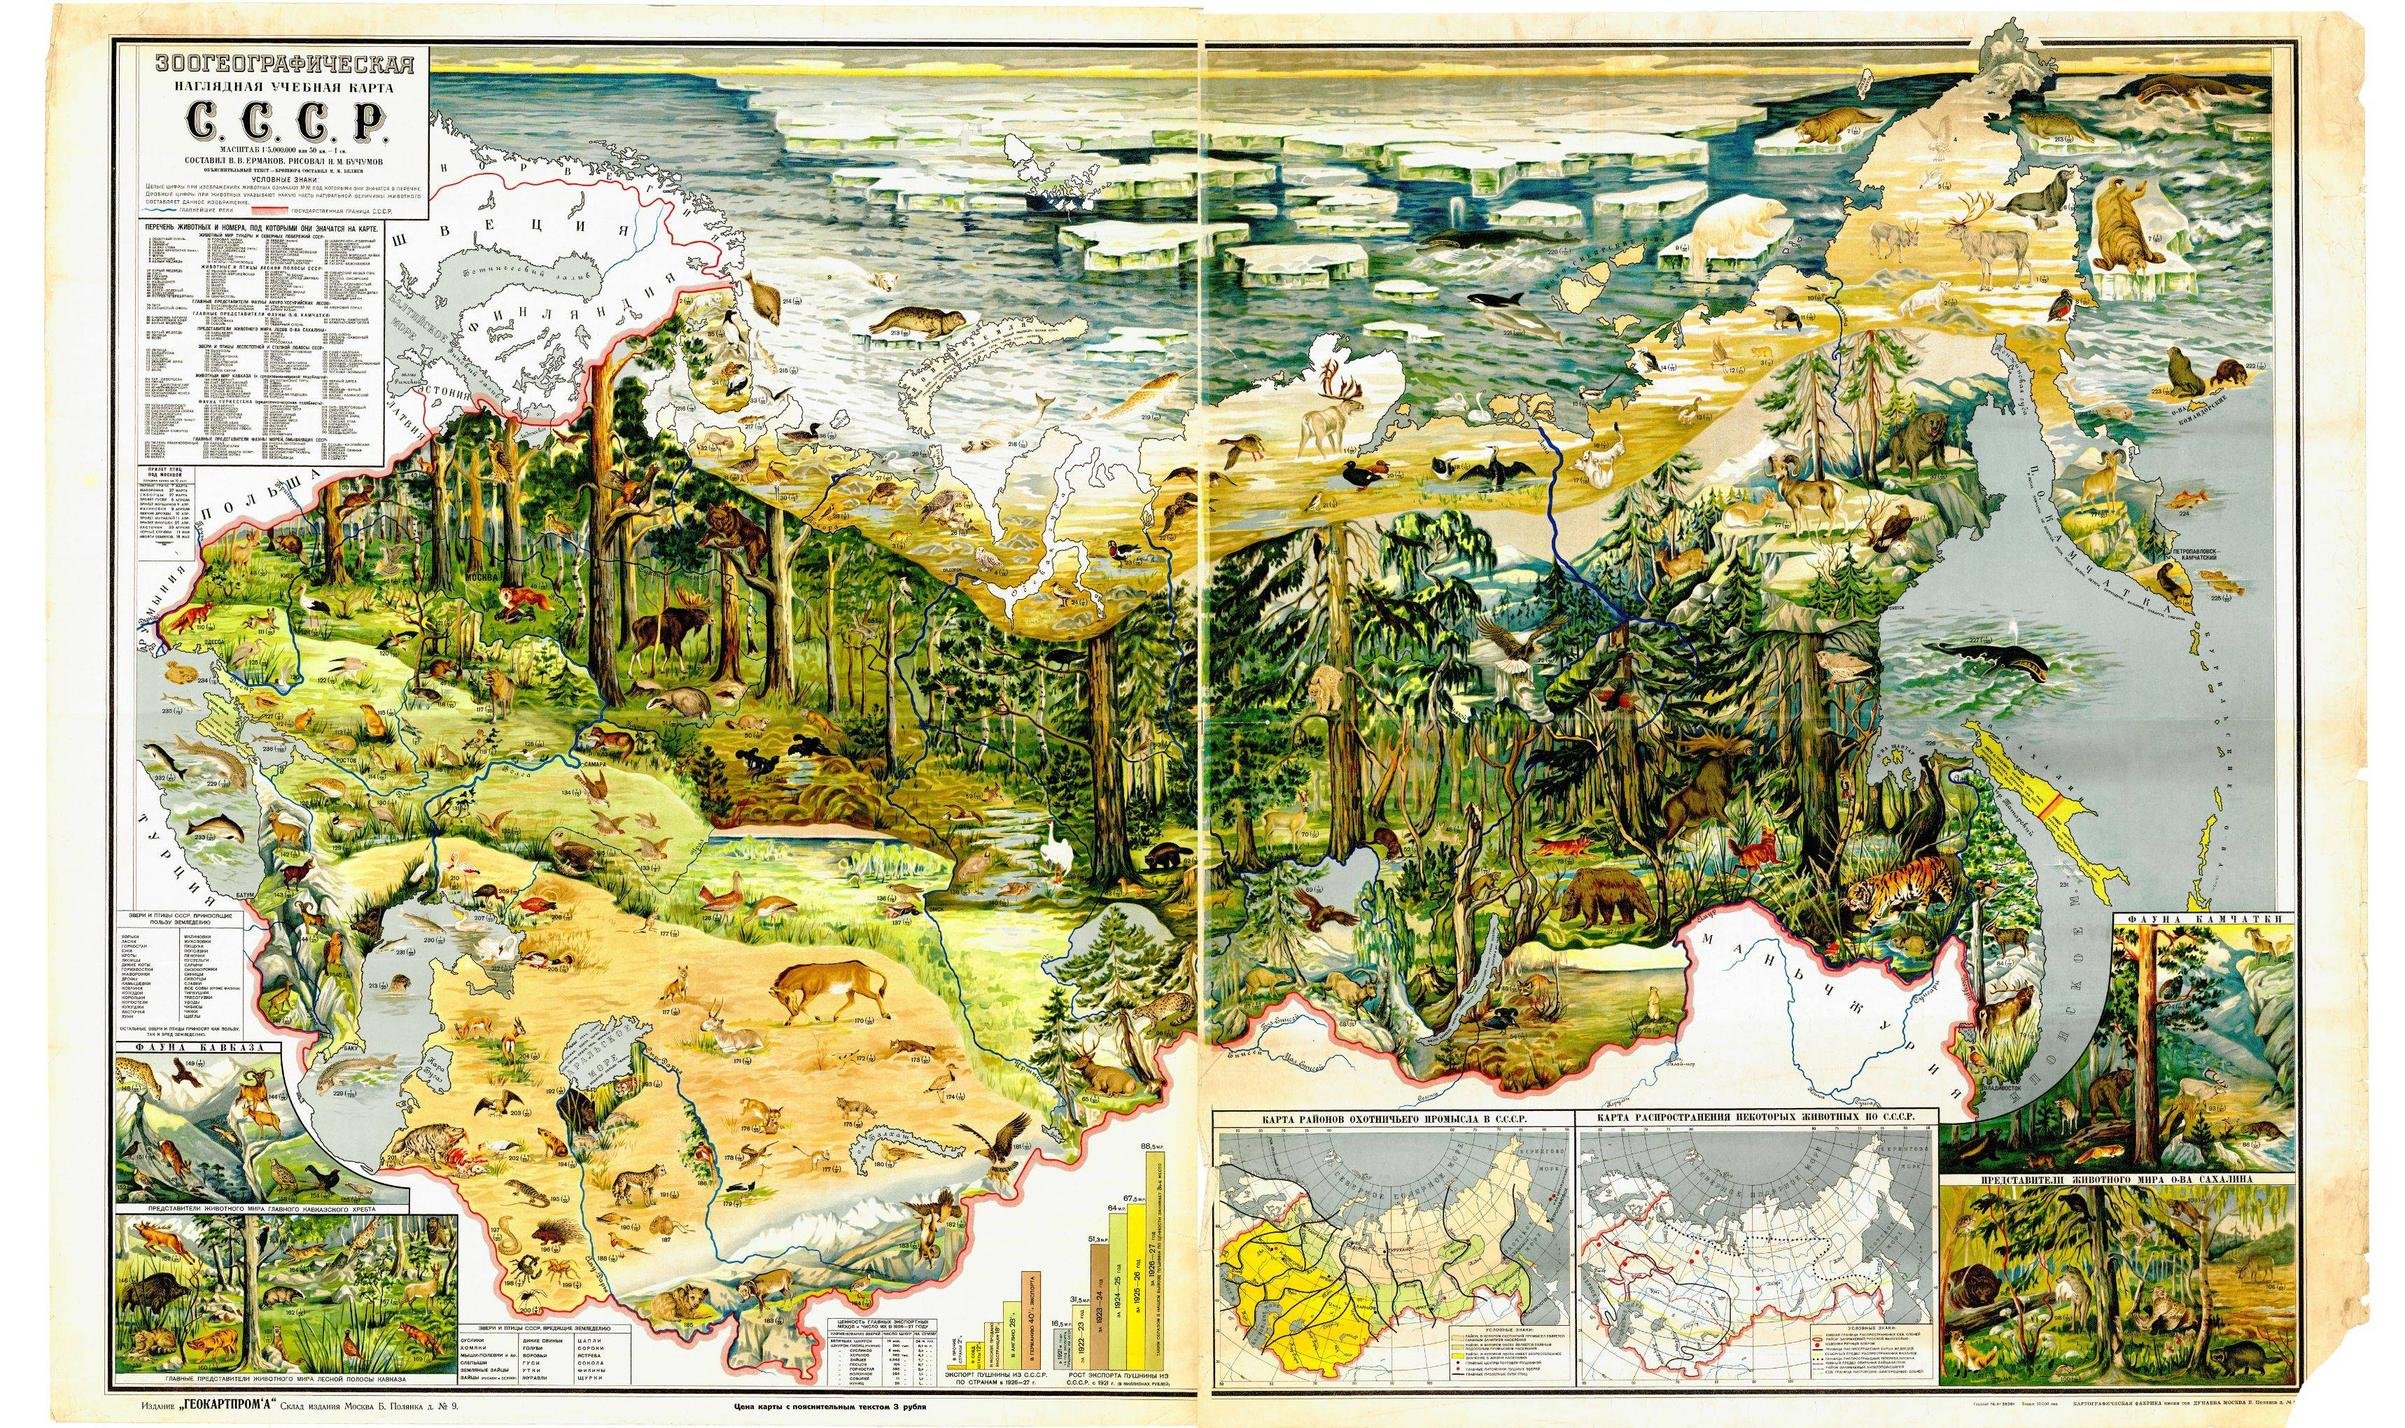 A map of the USSR showing illustrations of its biodiversity